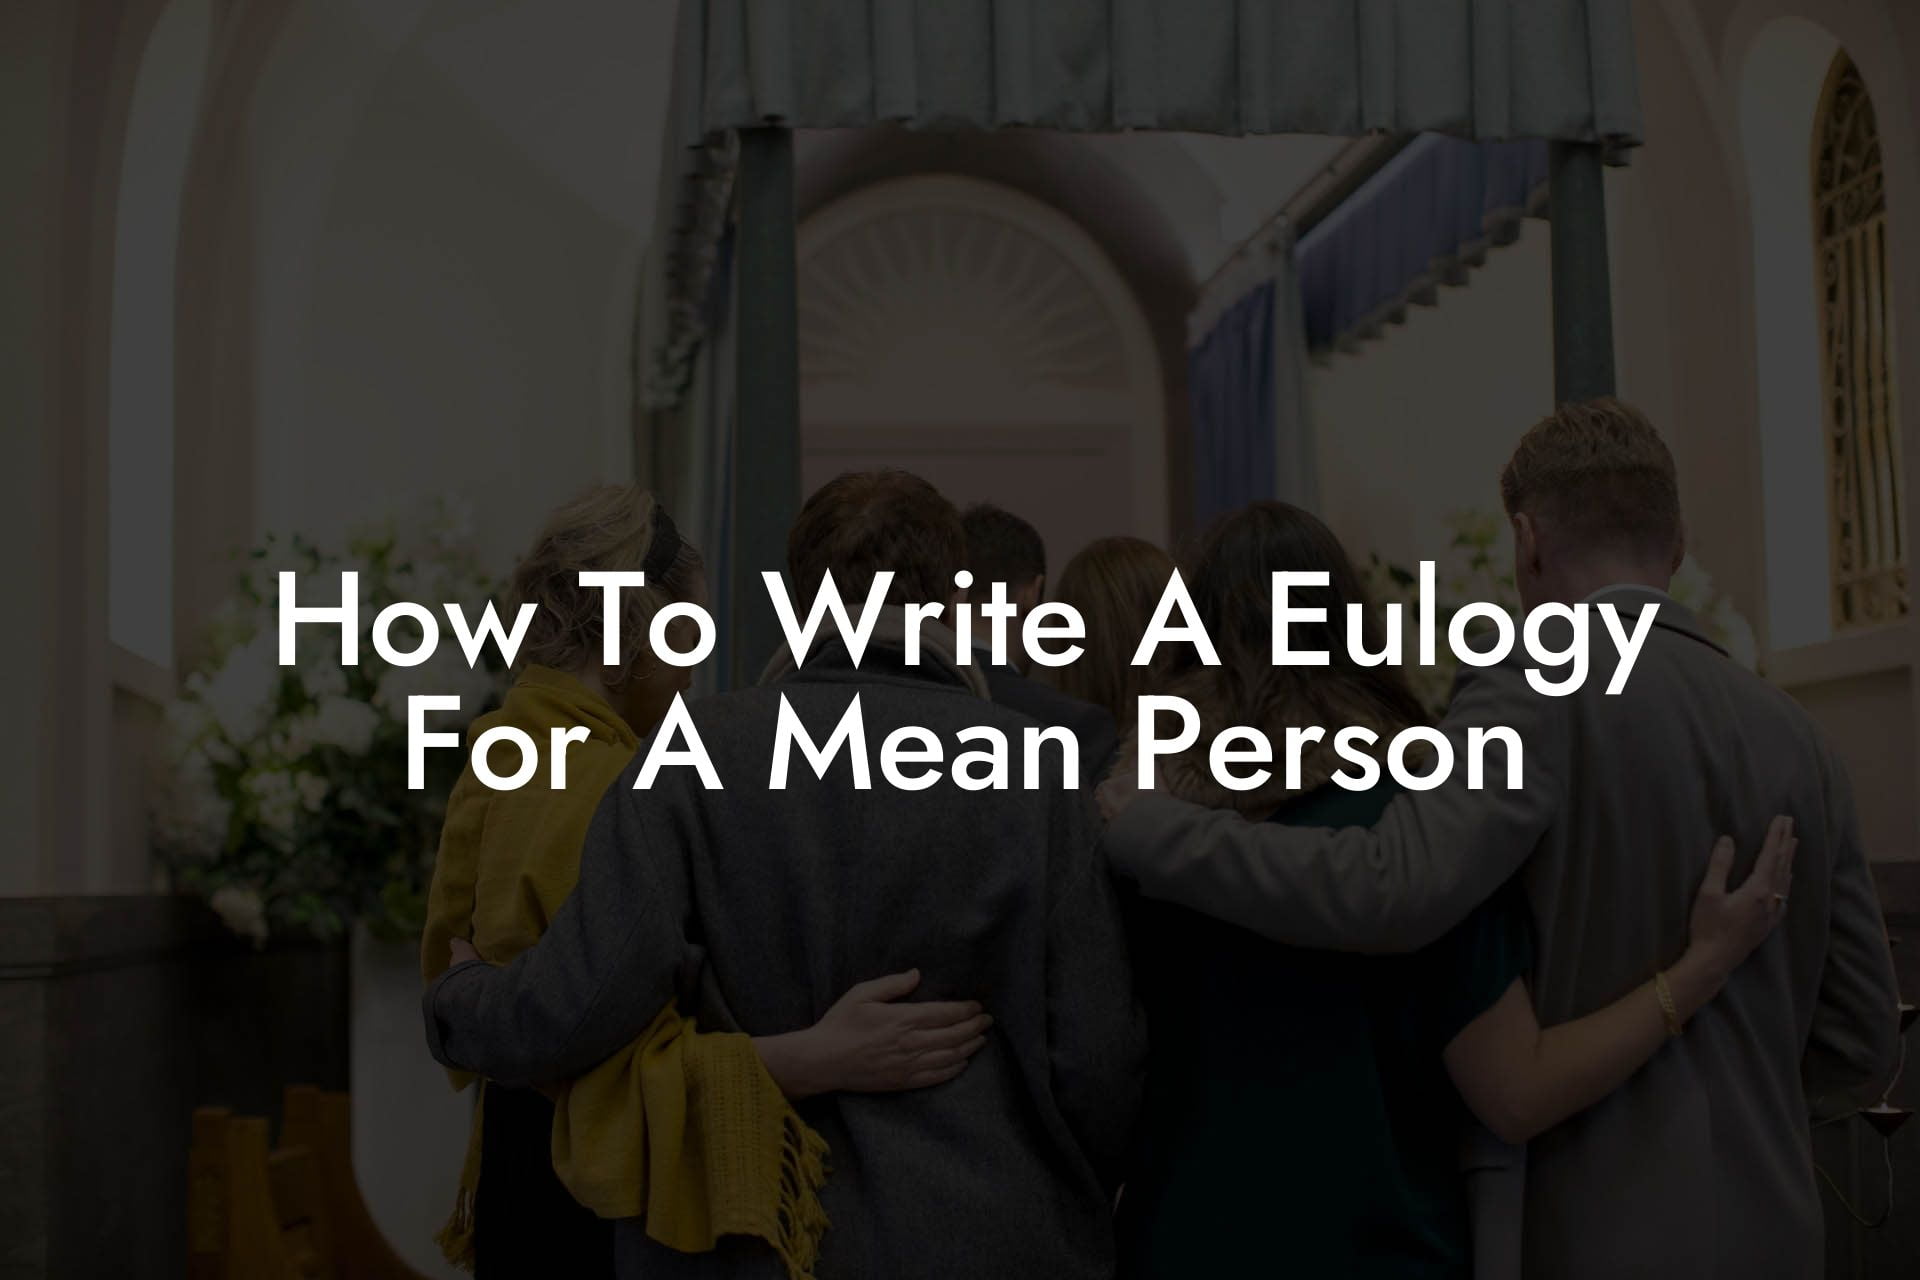 How To Write A Eulogy For A Mean Person